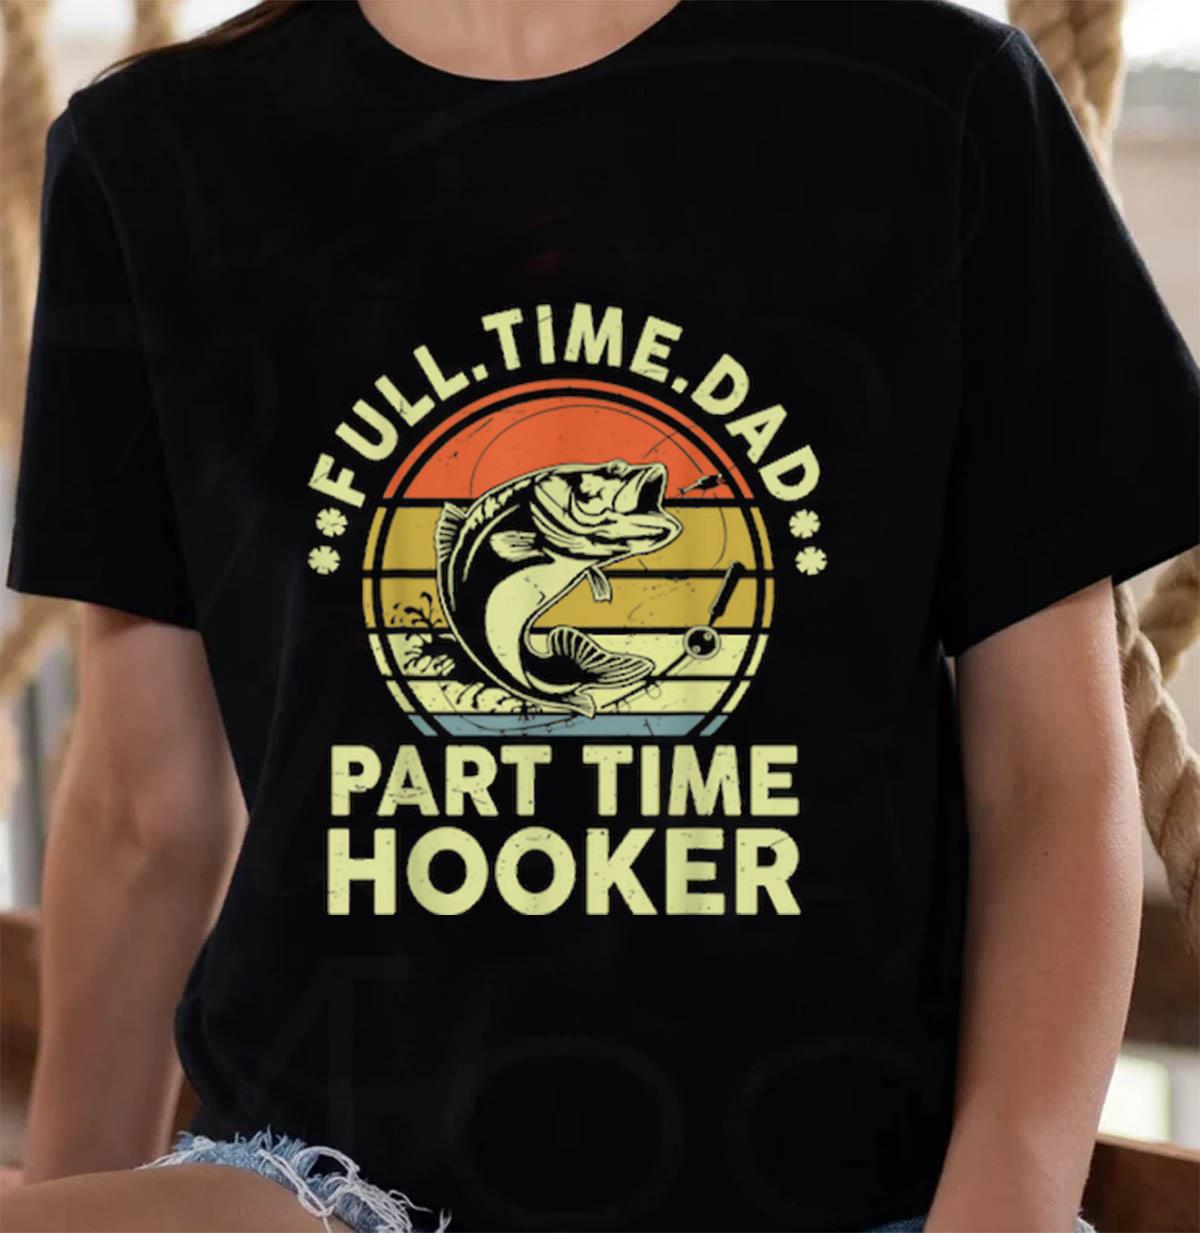 Full time dad part time hooker funny Bass Dad vintage fathers day